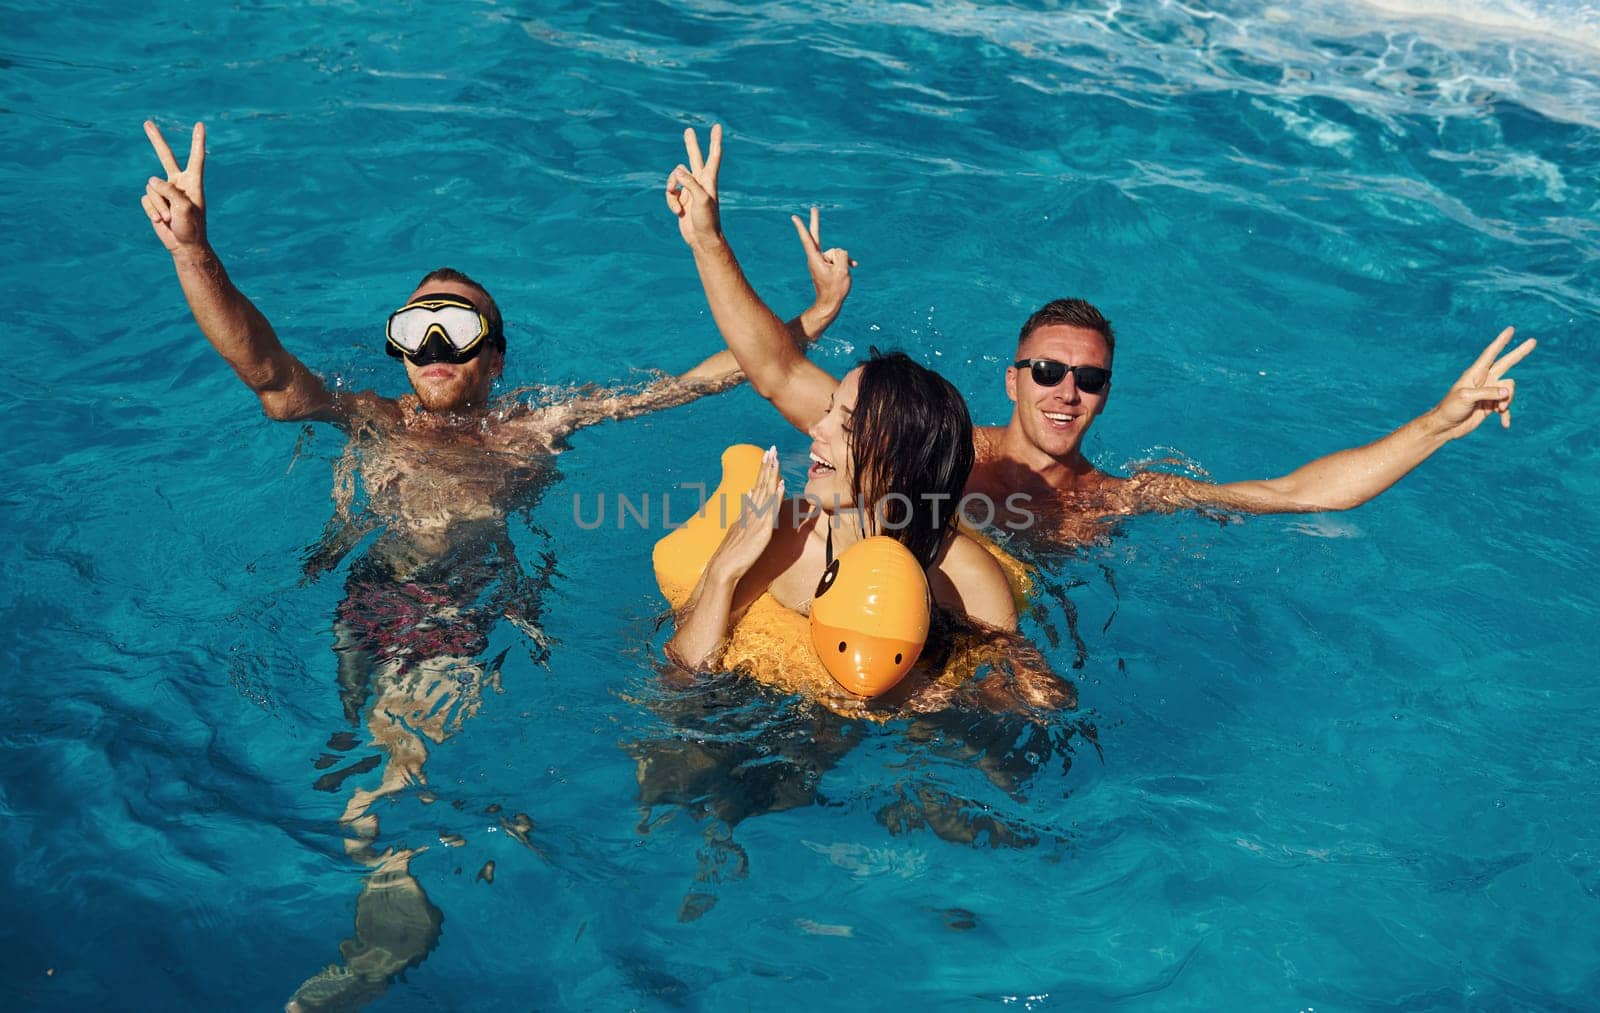 Using yellow colored duck to swim. Group of young happy people have fun in swimming pool at daytime by Standret